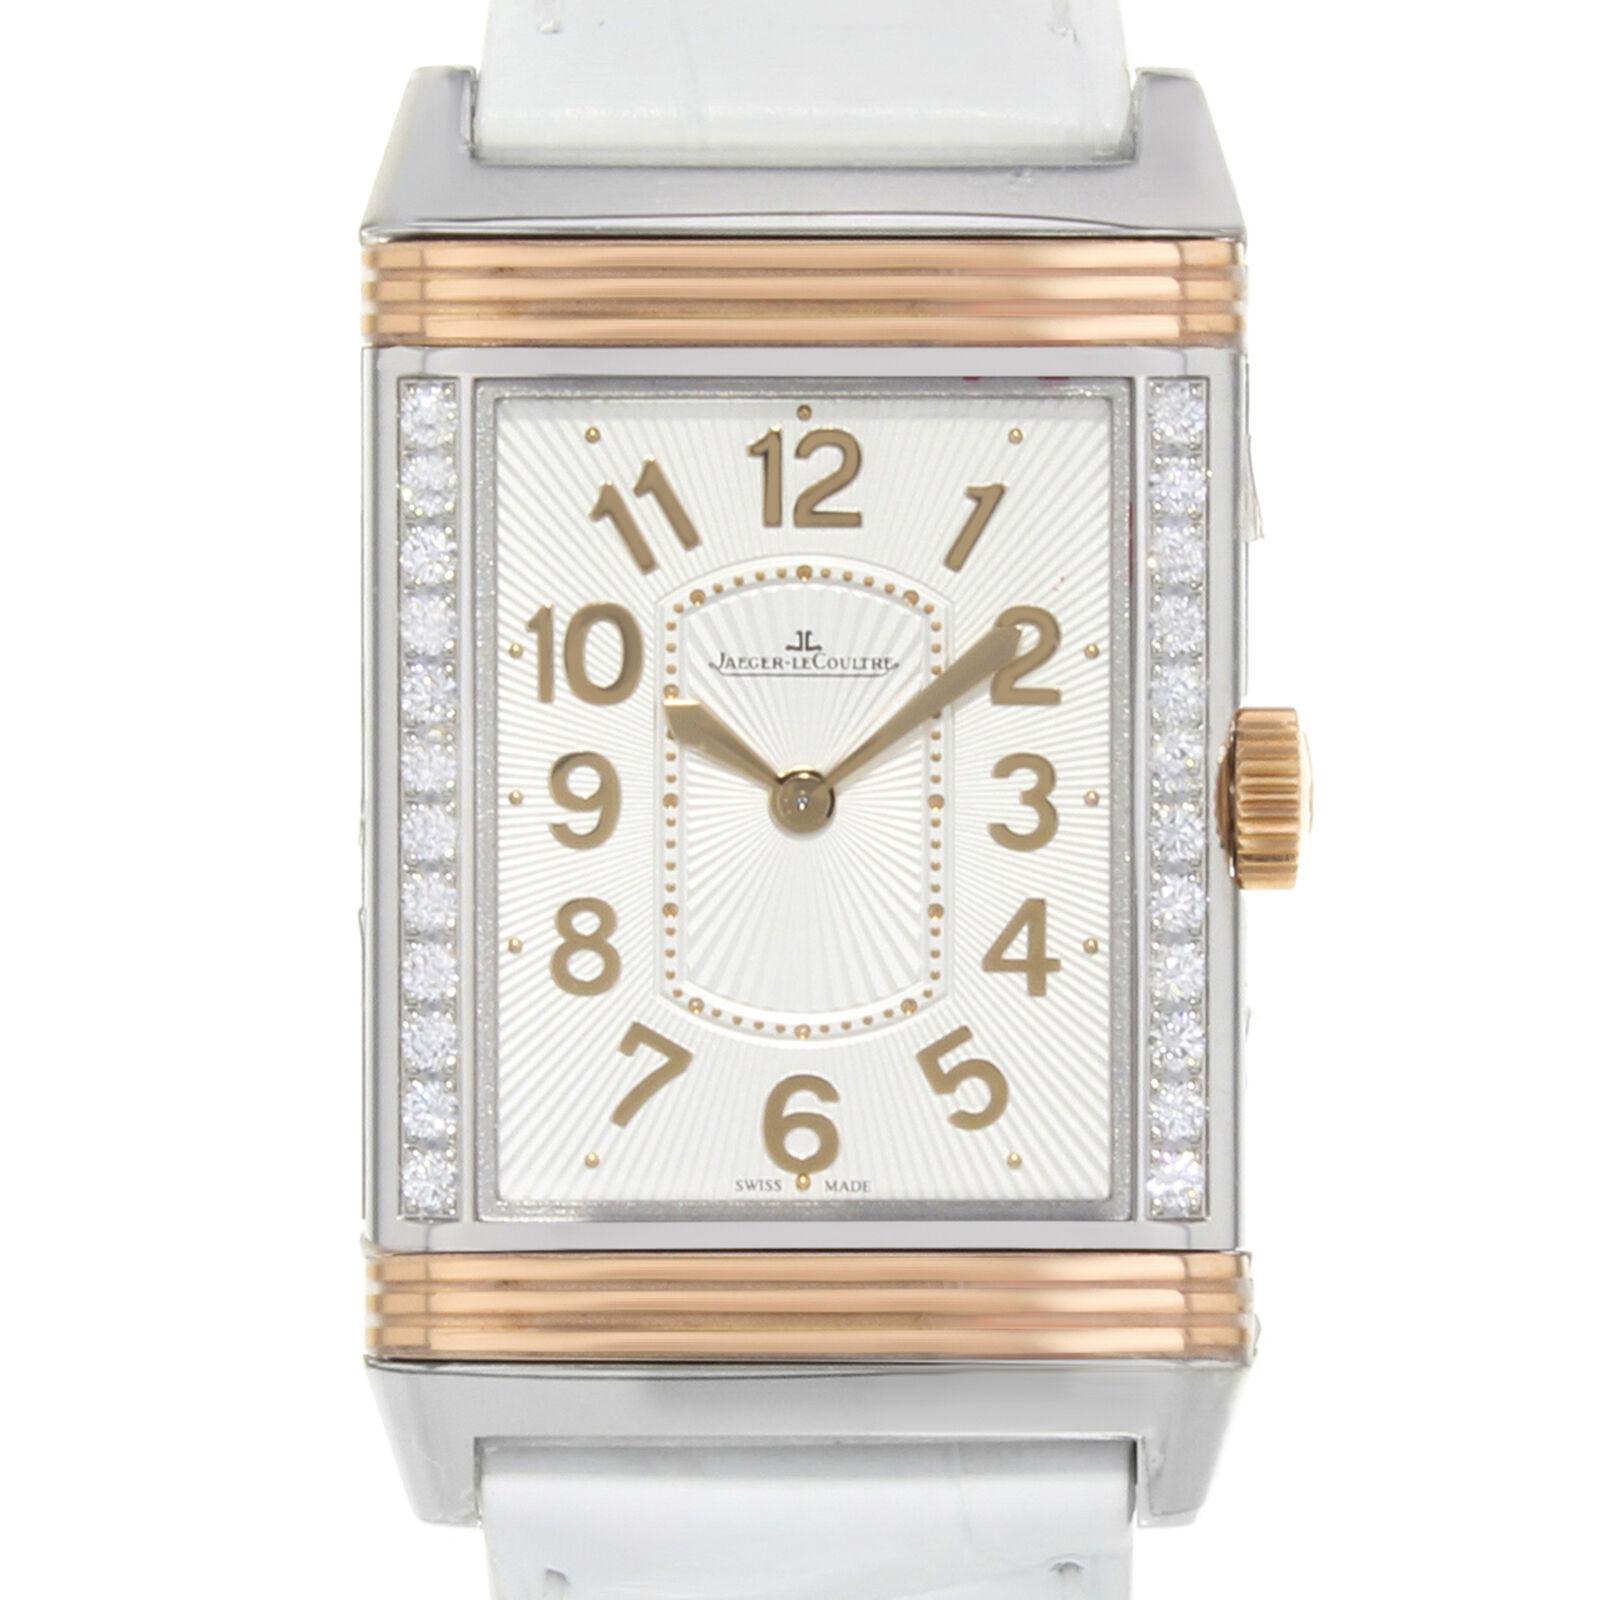 This never been worn Jaeger-LeCoultre Grande Reverso Q3224420 is a beautiful Ladies timepiece that is powered by a mechanical movement which is cased in a stainless steel case. It has a rectangle shape face, diamonds dial and has hand Arabic